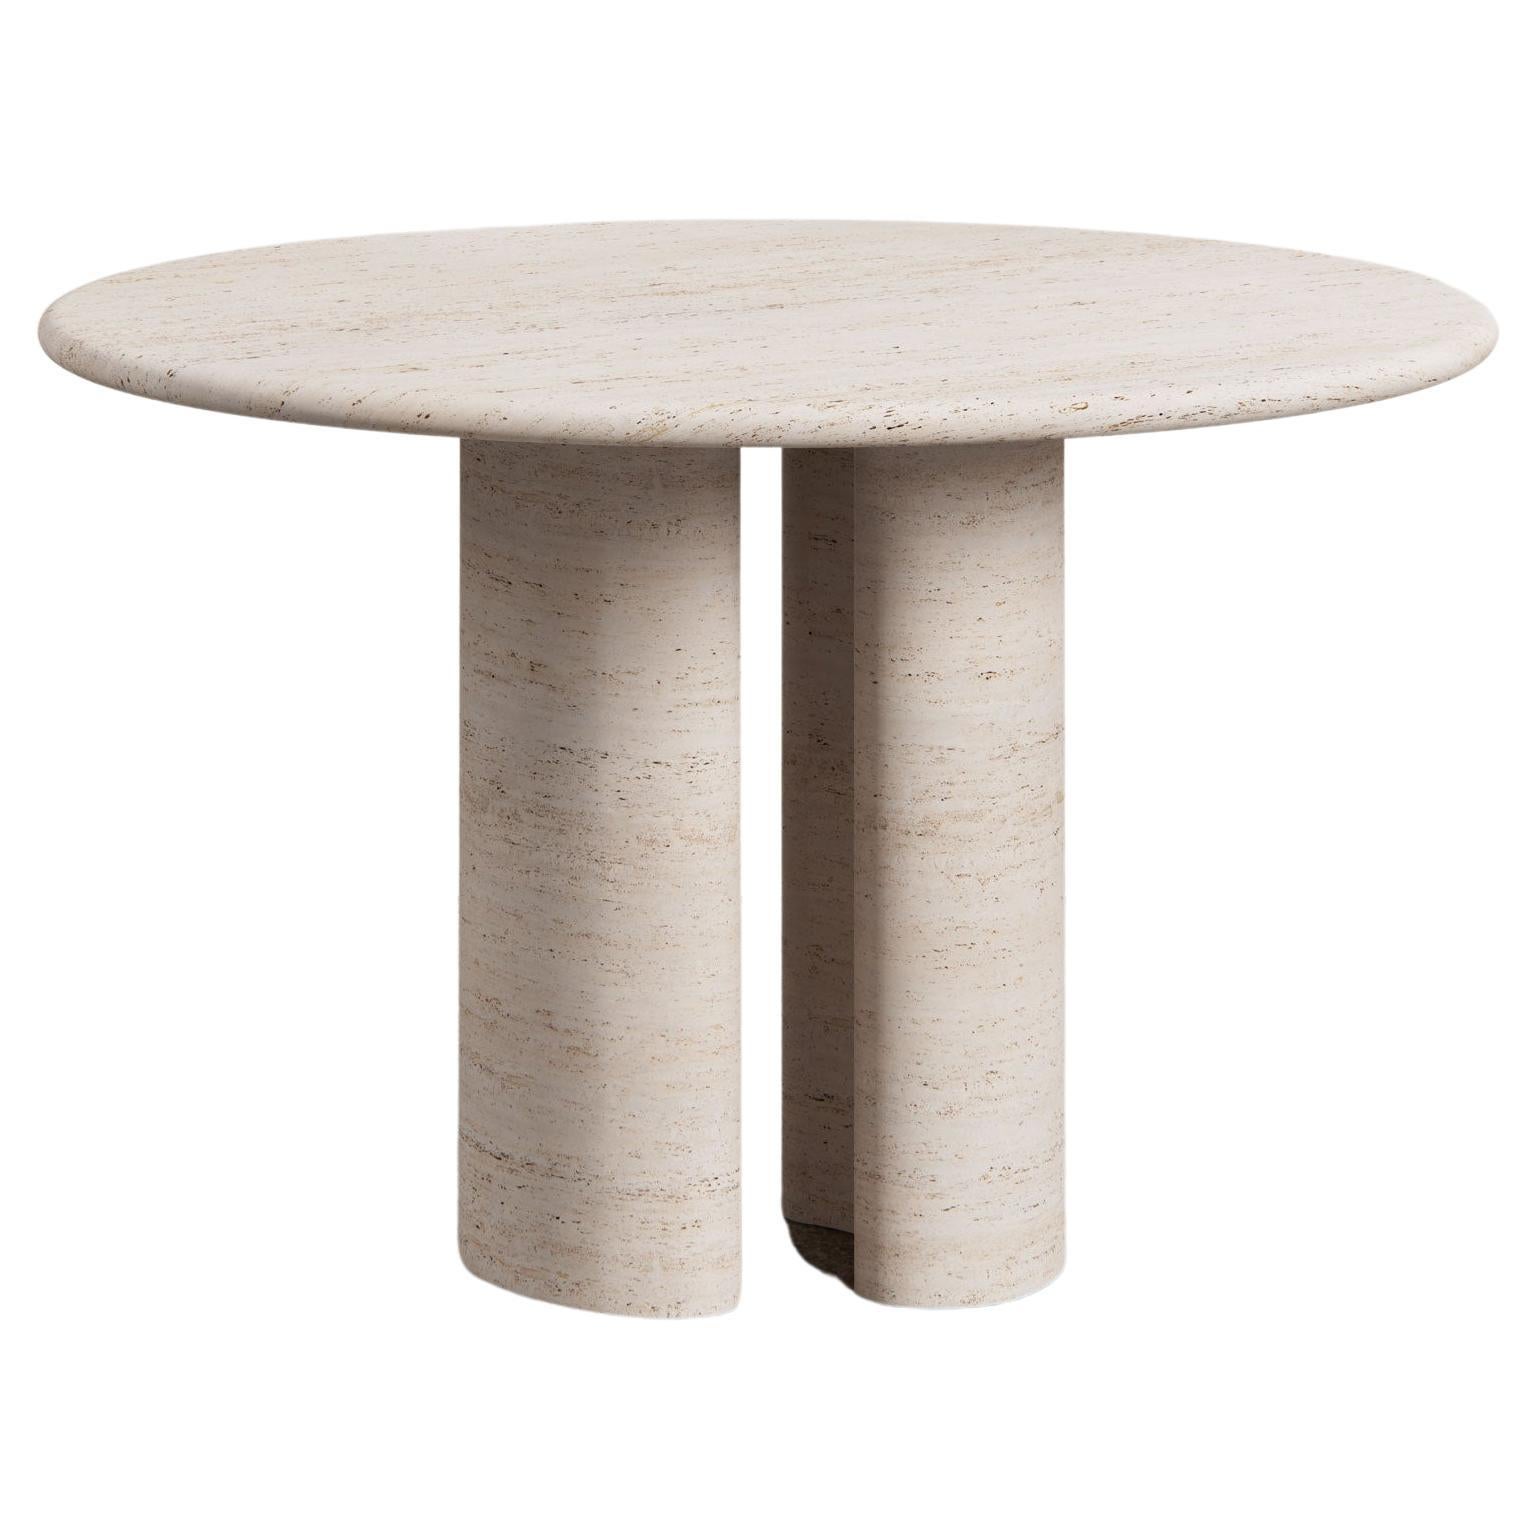 Pietra Dining Table by Just Adele in Bianco Travertine For Sale